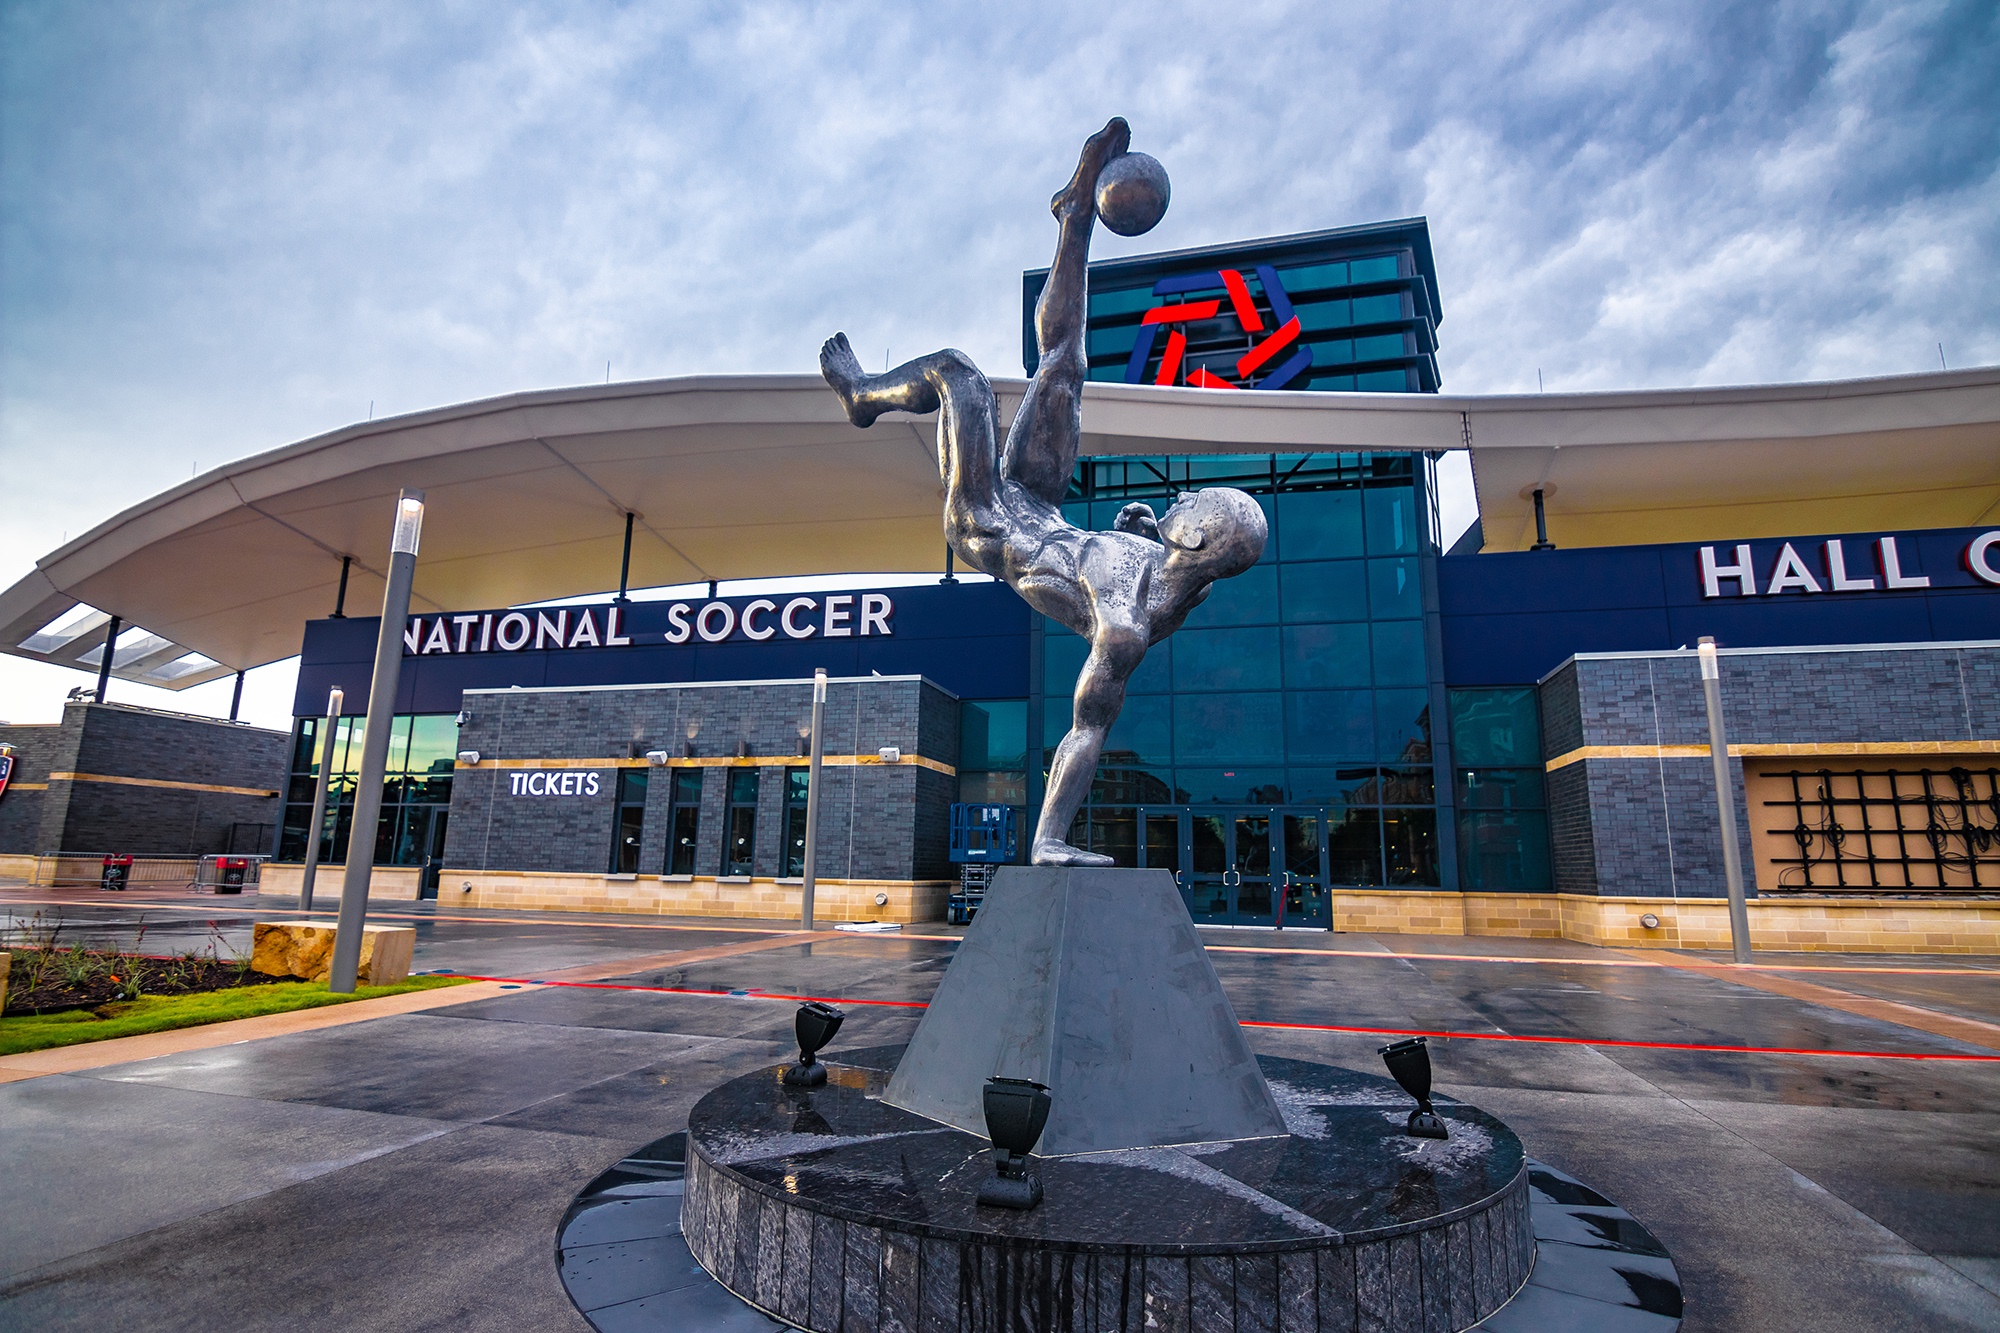 National Soccer Hall of Fame - Experience | National Soccer Hall of Fame